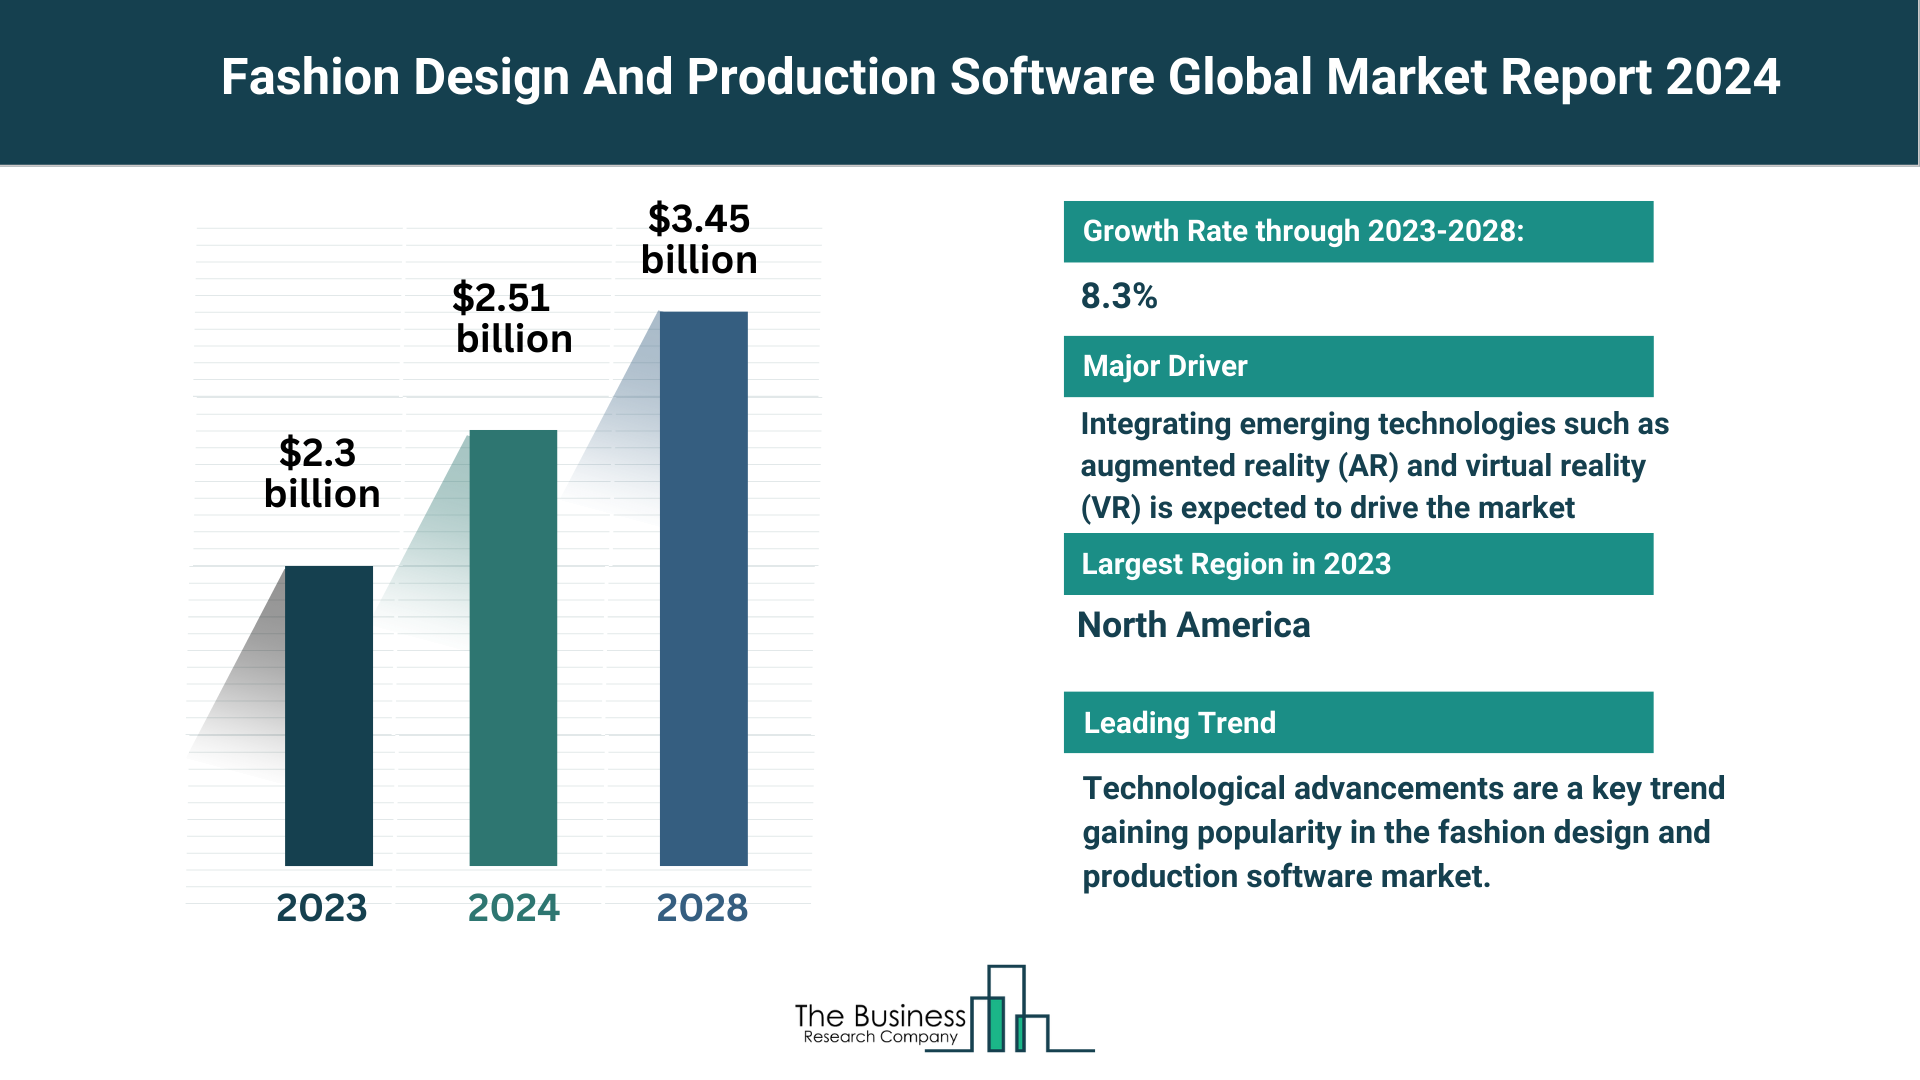 Global Fashion Design And Production Software Market